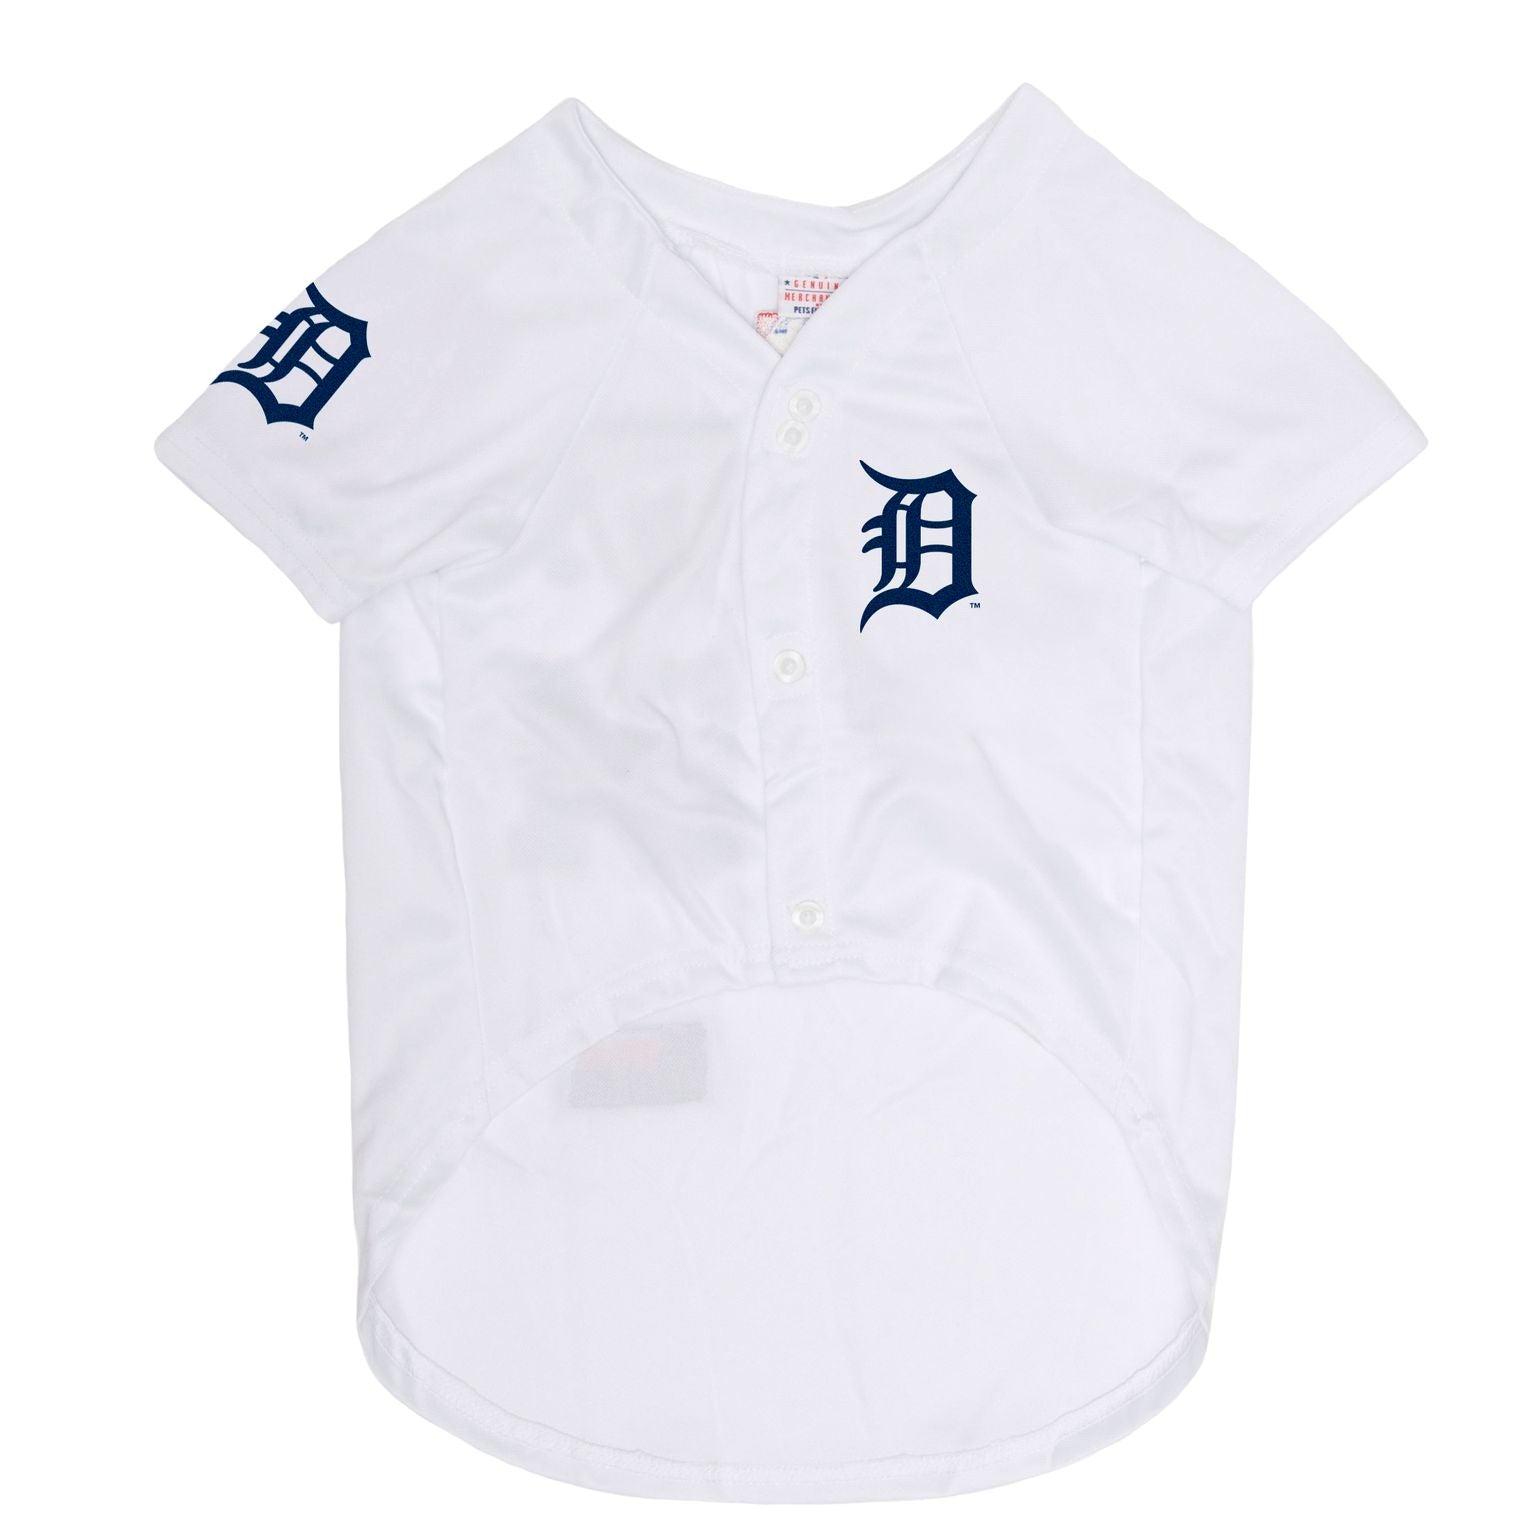 Detroit Tigers MLB Jersey - Trendy Dog Boutique